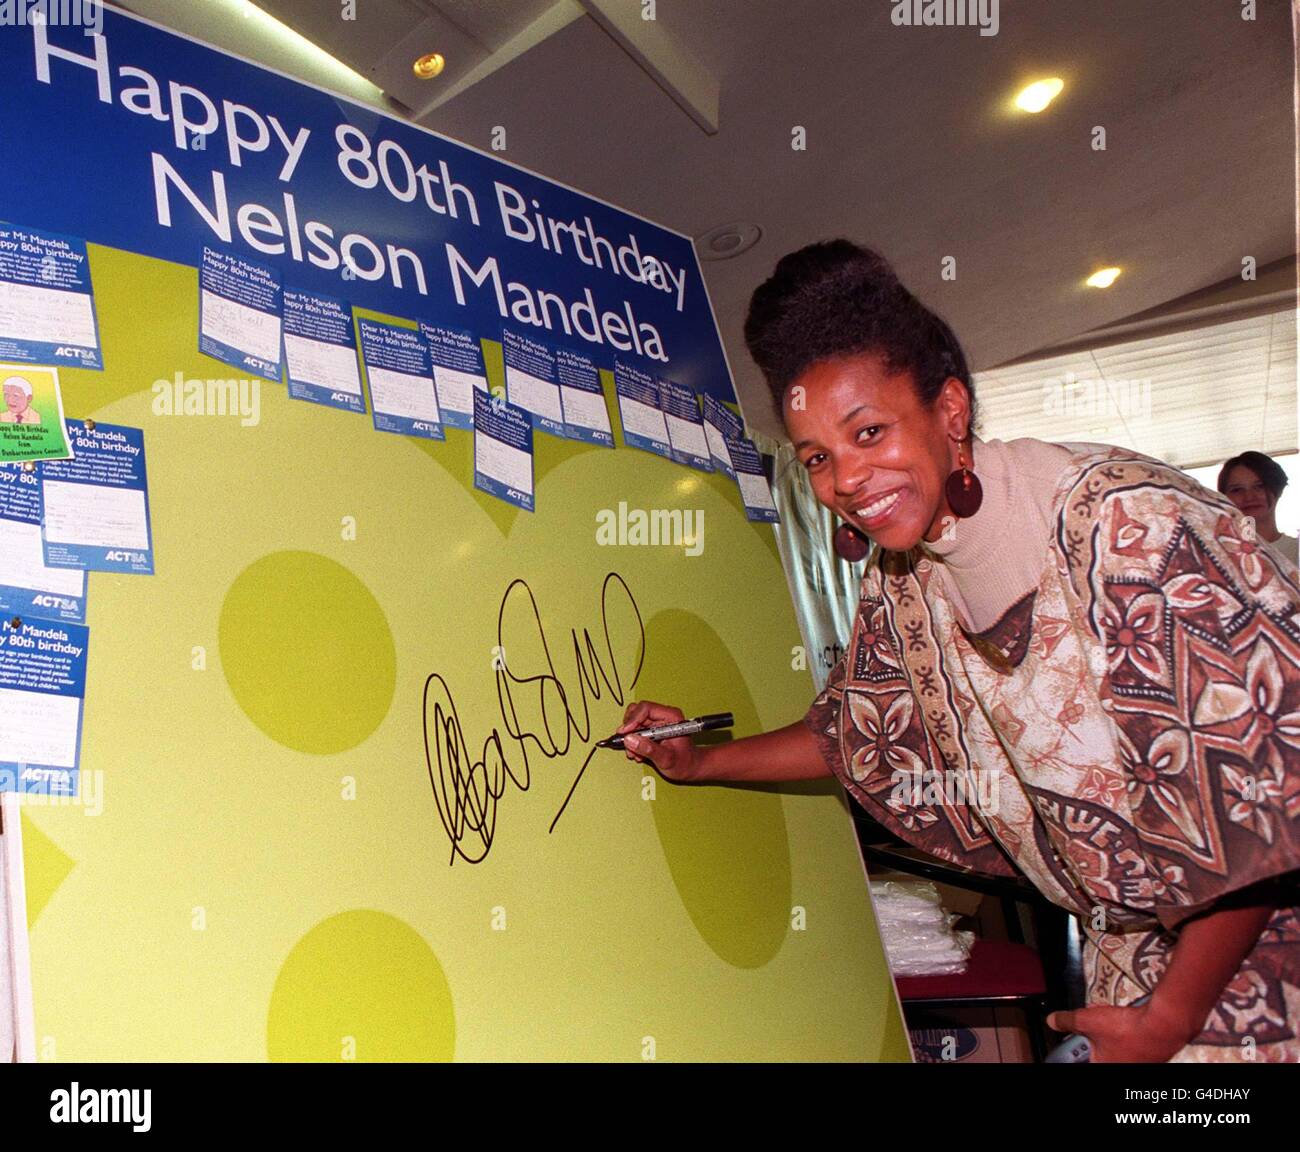 South African High Commissioner, Cheryl Carolus, is the first to sign a giant 80th Birthday card for President Mandela, at the Royal Festival Hall in London today (Sat). President Nelson Mandela married his long-time sweetheart Graca Machel today. Photo by Andrew Stuart. Stock Photo